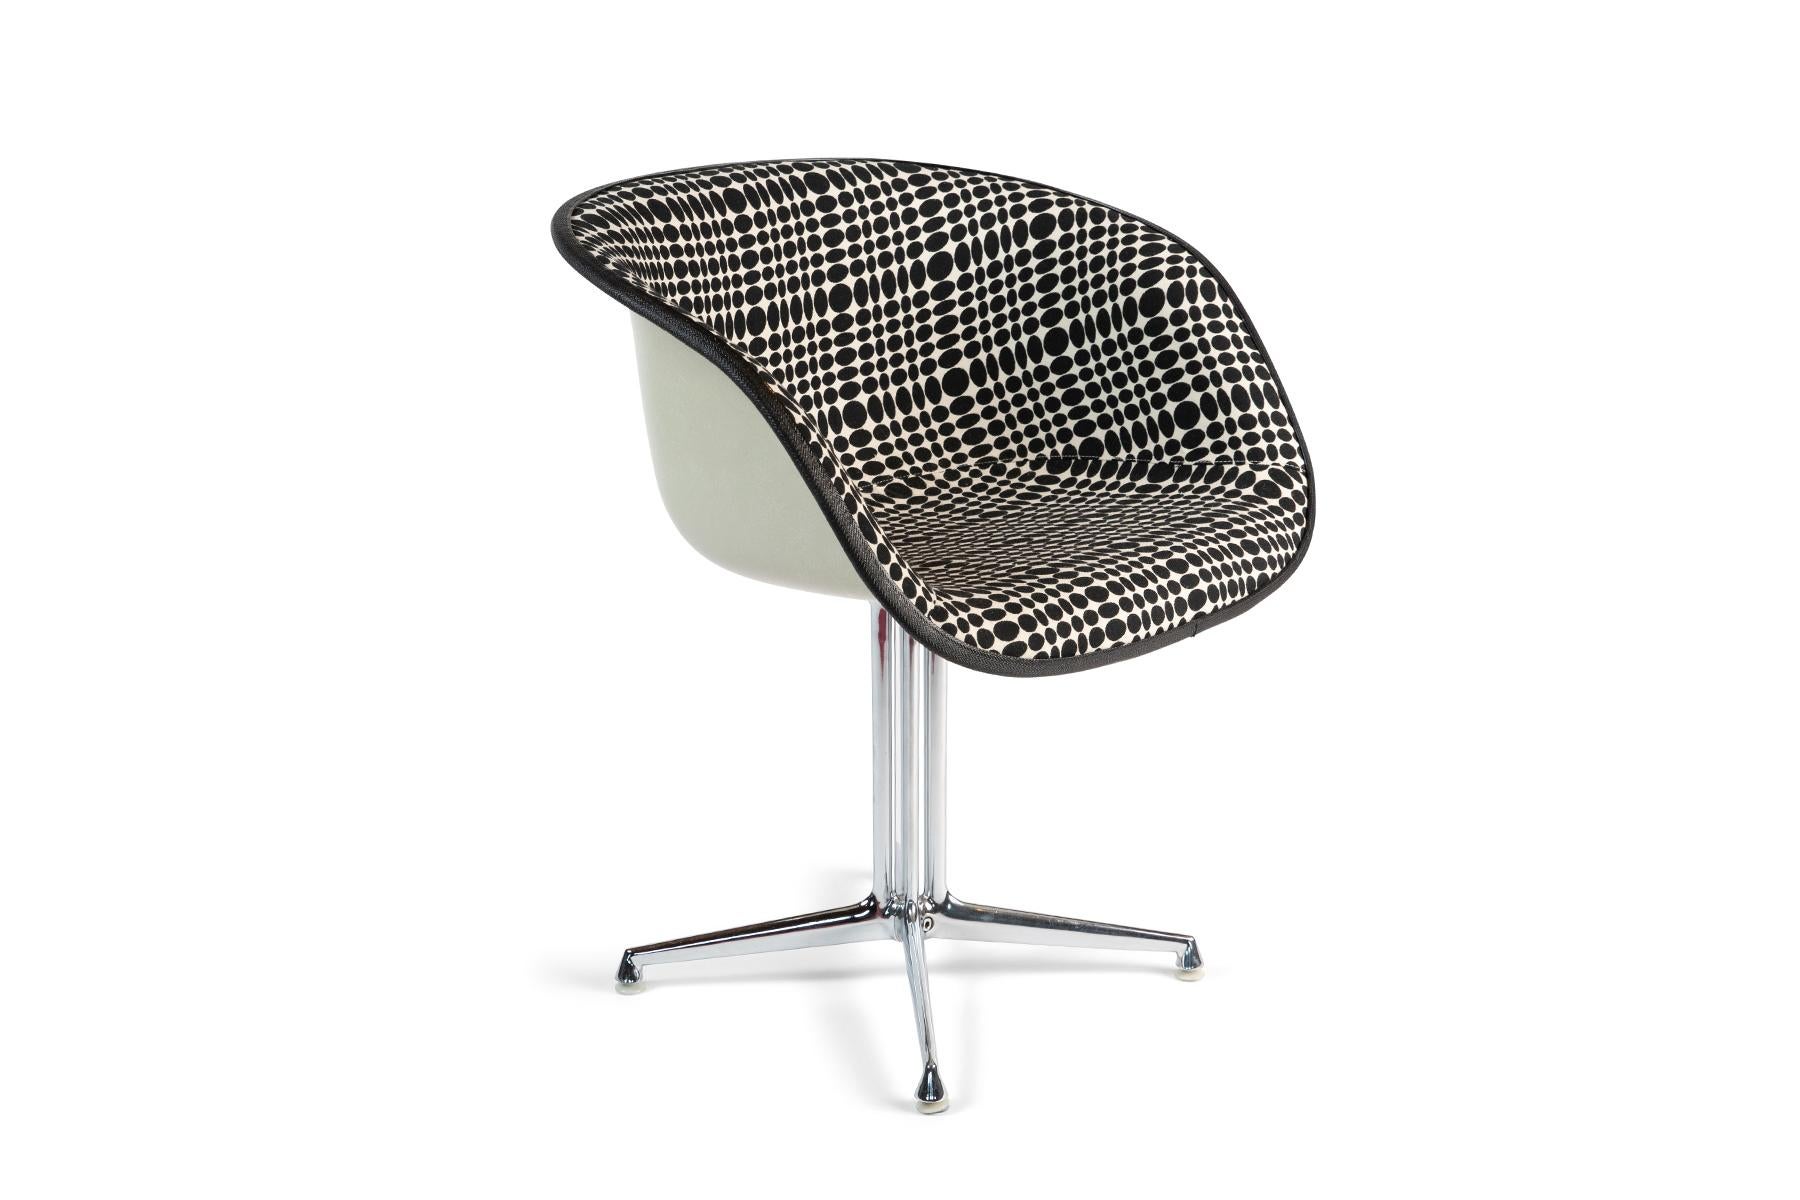 Mid-Century Modern La Fonda Chairs by Eames for Herman Miller in Verner Panton Fabric